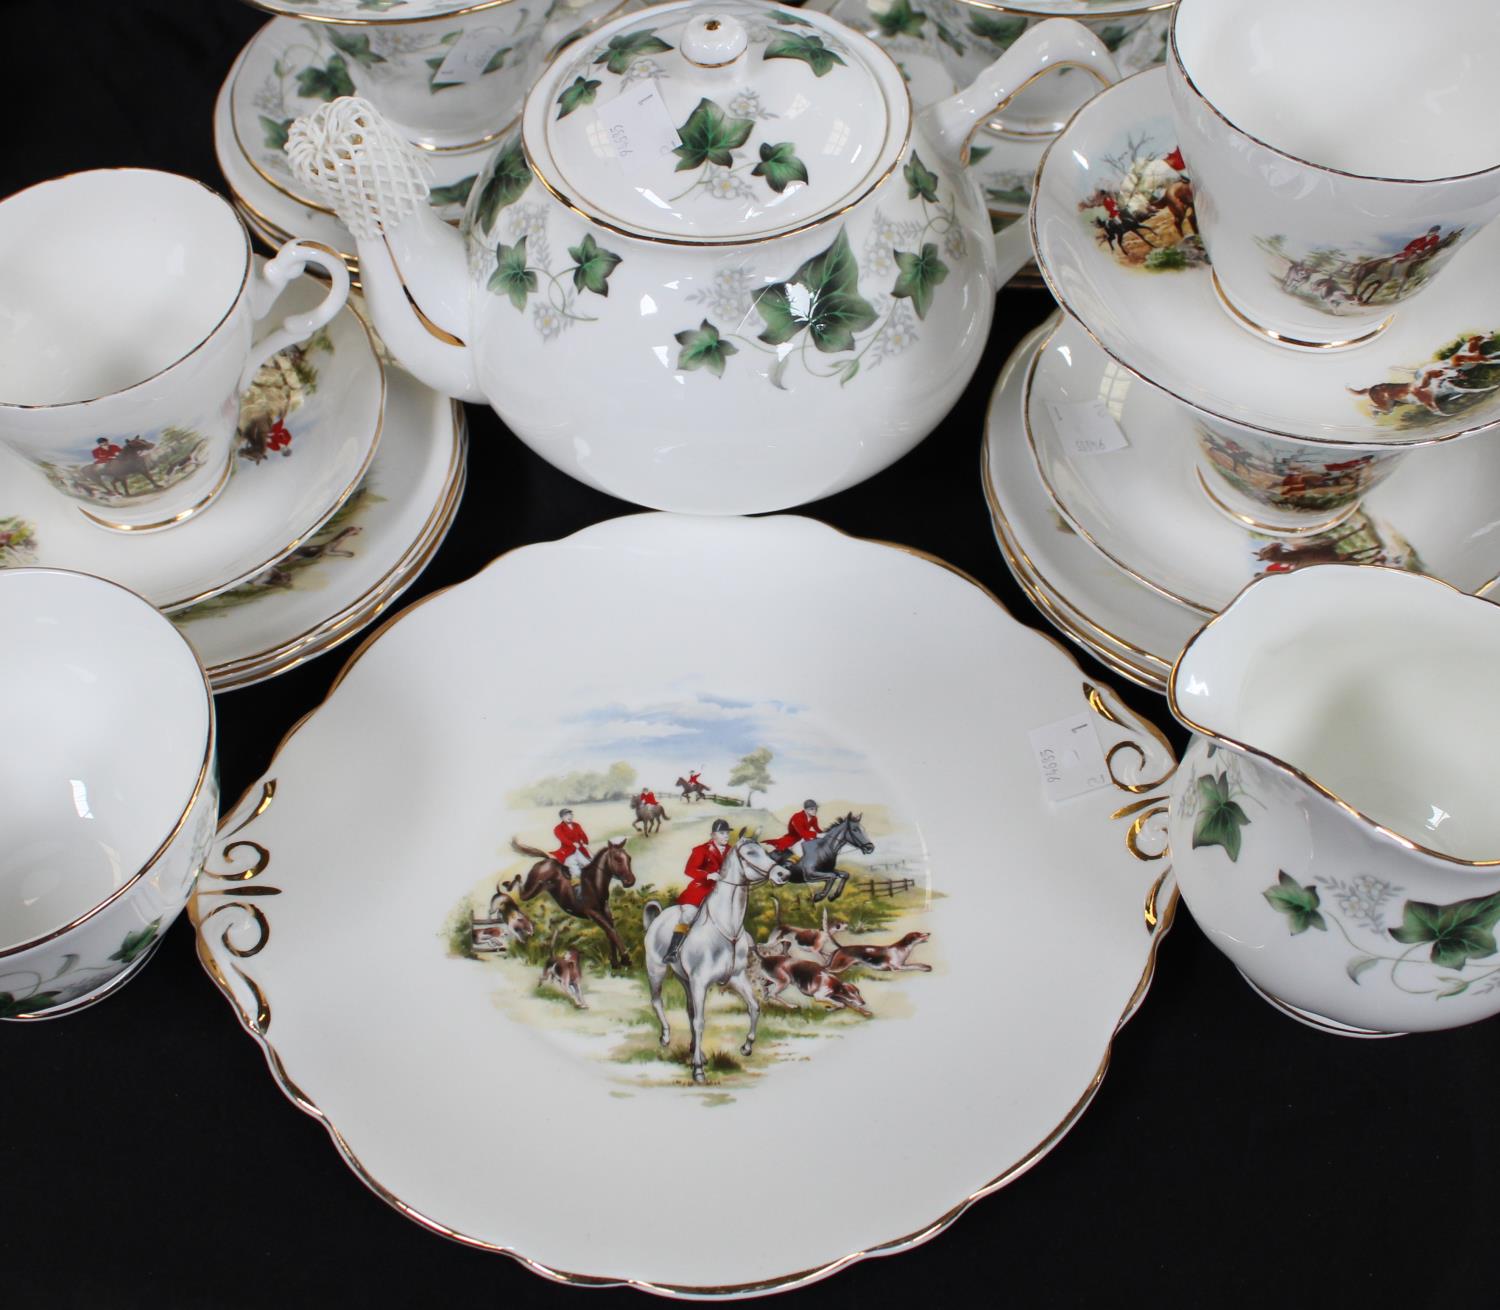 Ceramics - a Duchess China Ivy pattern tea service for six, cups, saucers, side plates, tea pot, - Image 2 of 2